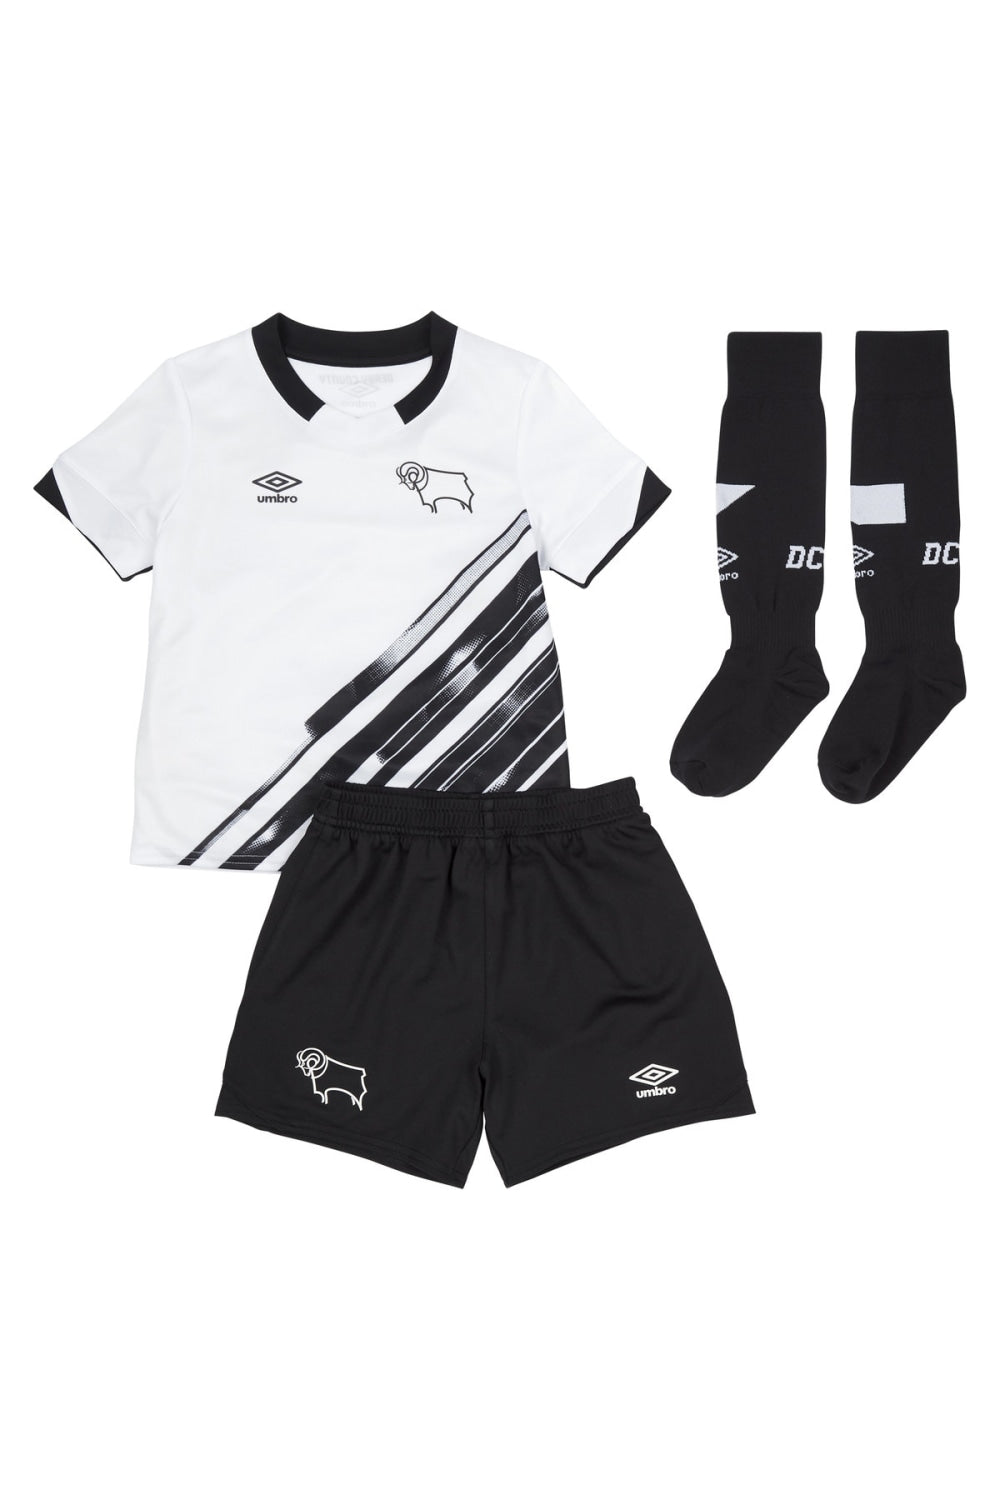 Childrens/Kids 22/23 Derby County FC Home Kit